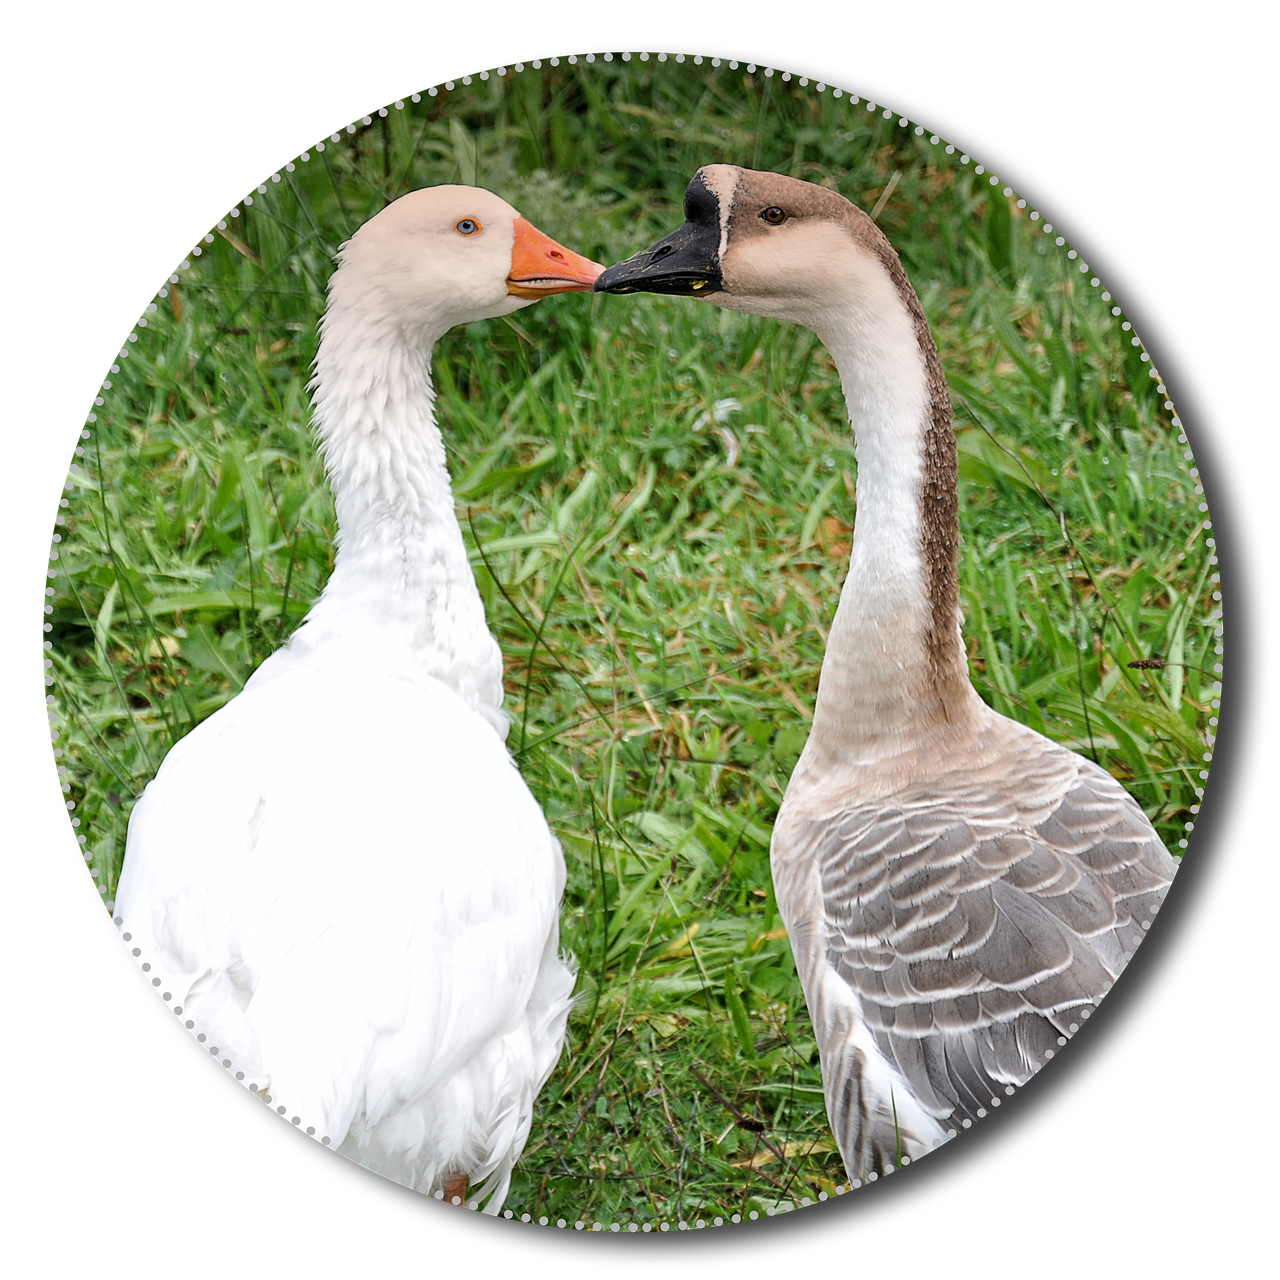 geese animals poultry free photo